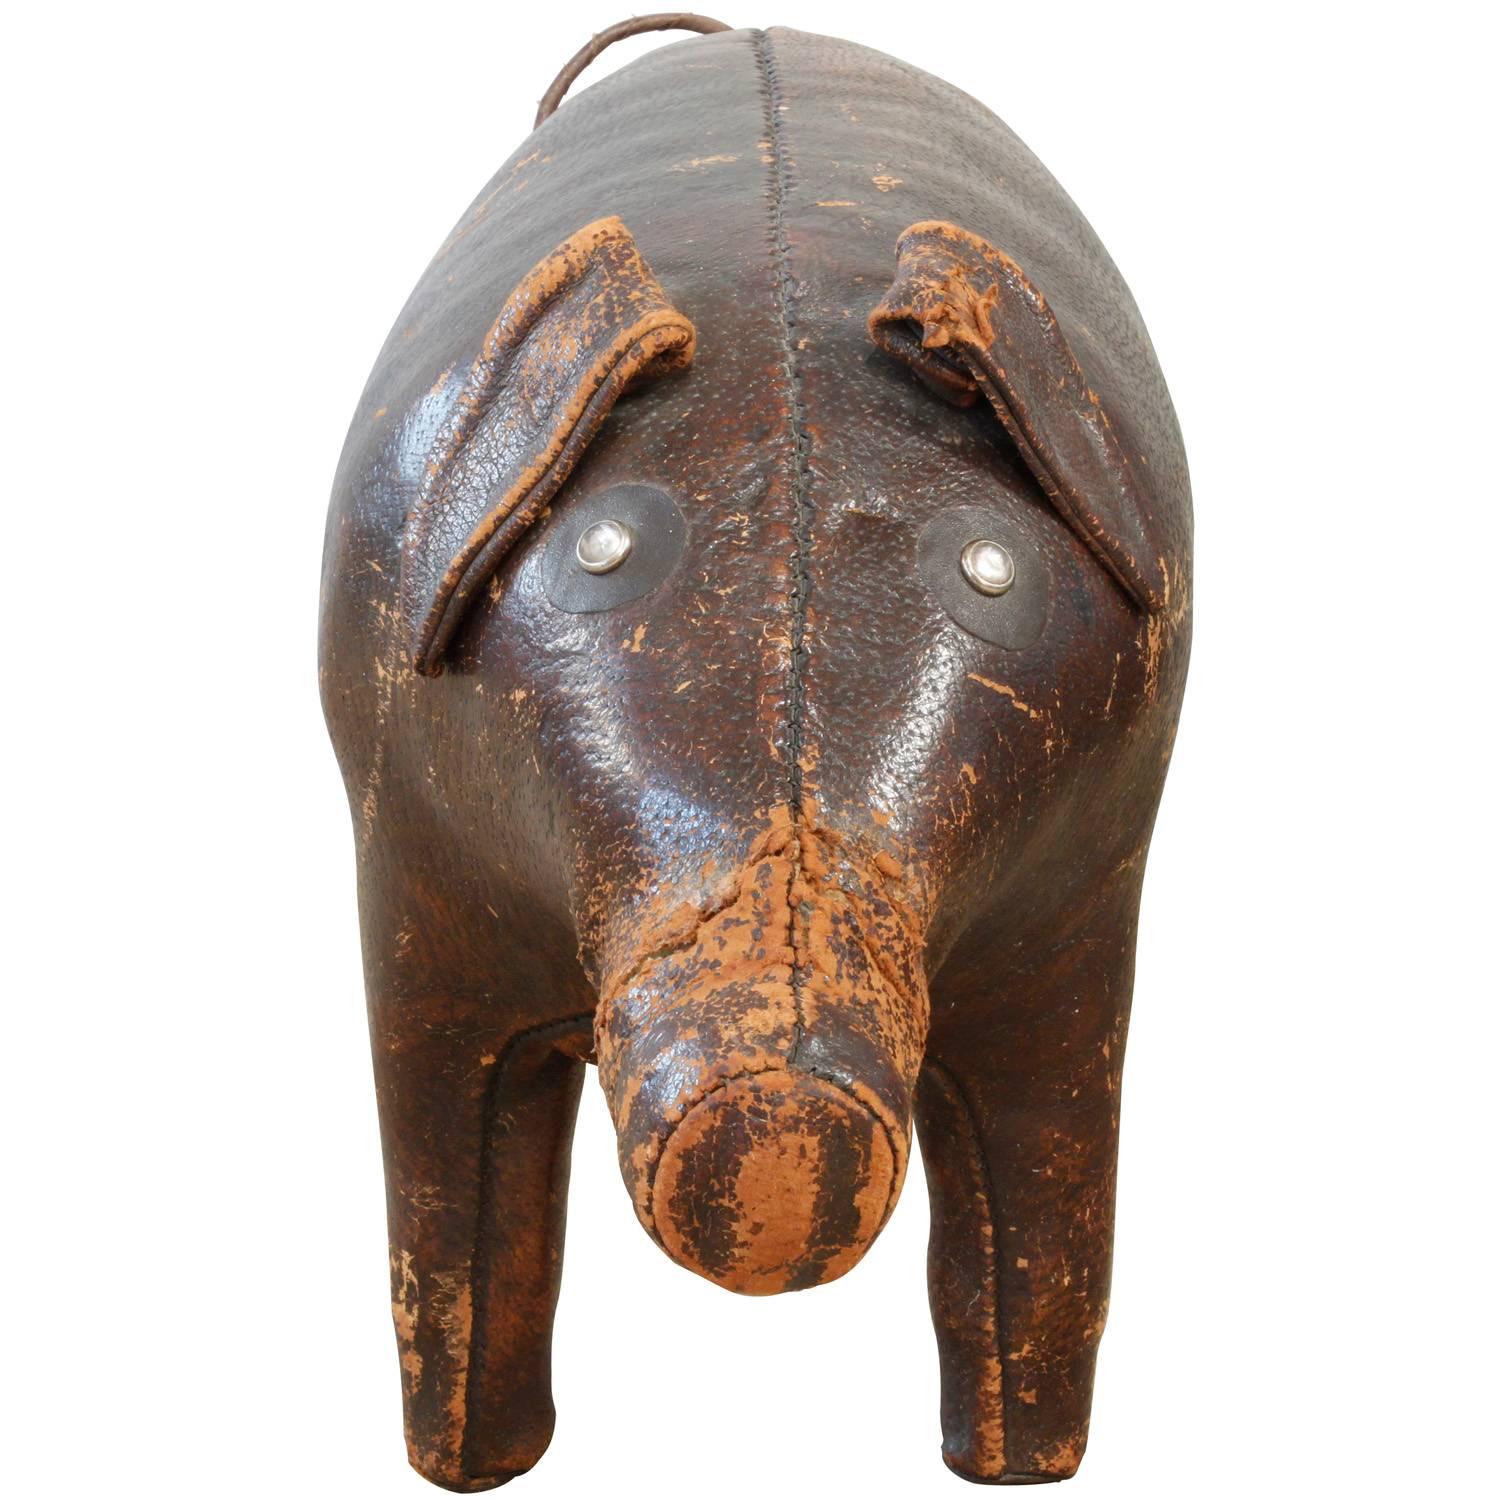 Hand-stitched leather pig designed by Omersa and Company for display at the Abercrombie and Fitch stores, England, 1960s.